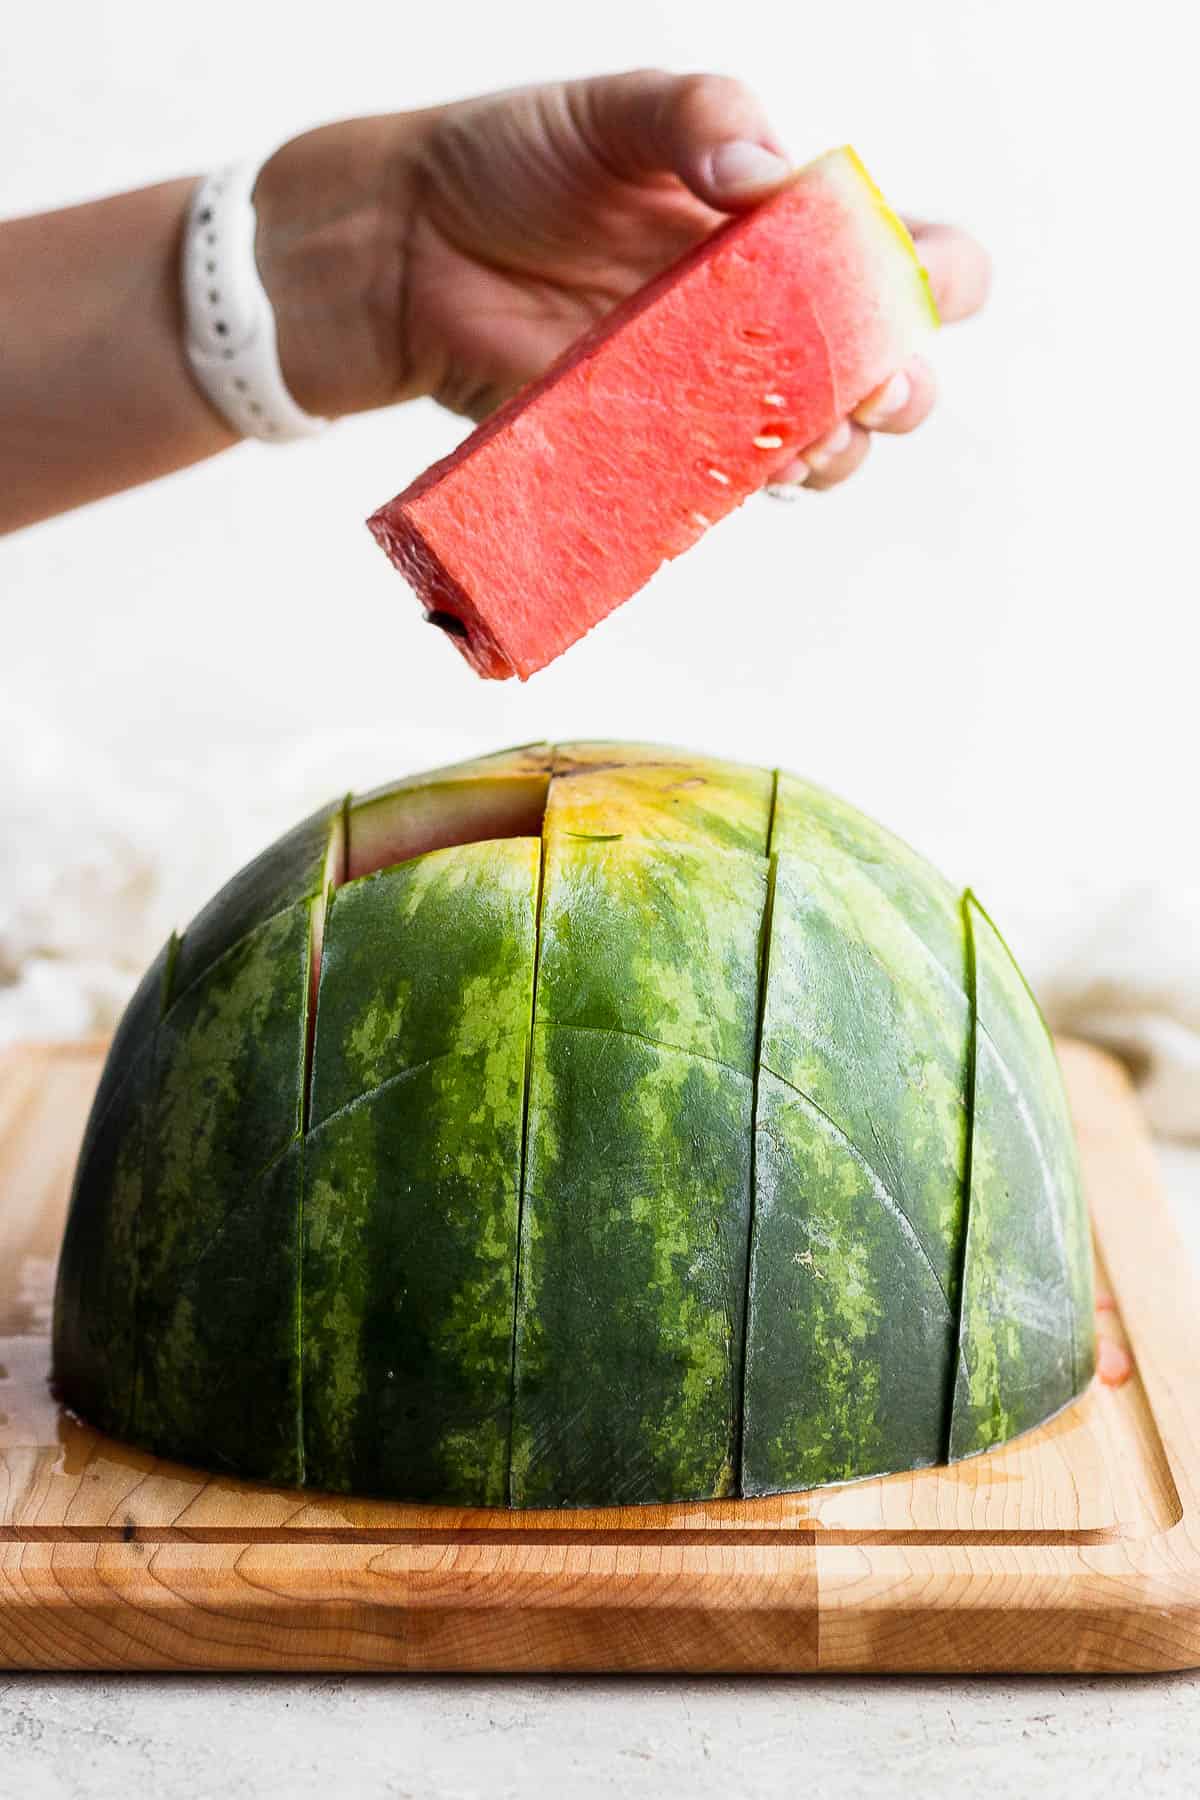 A hand pulling a stick out of a watermelon half.